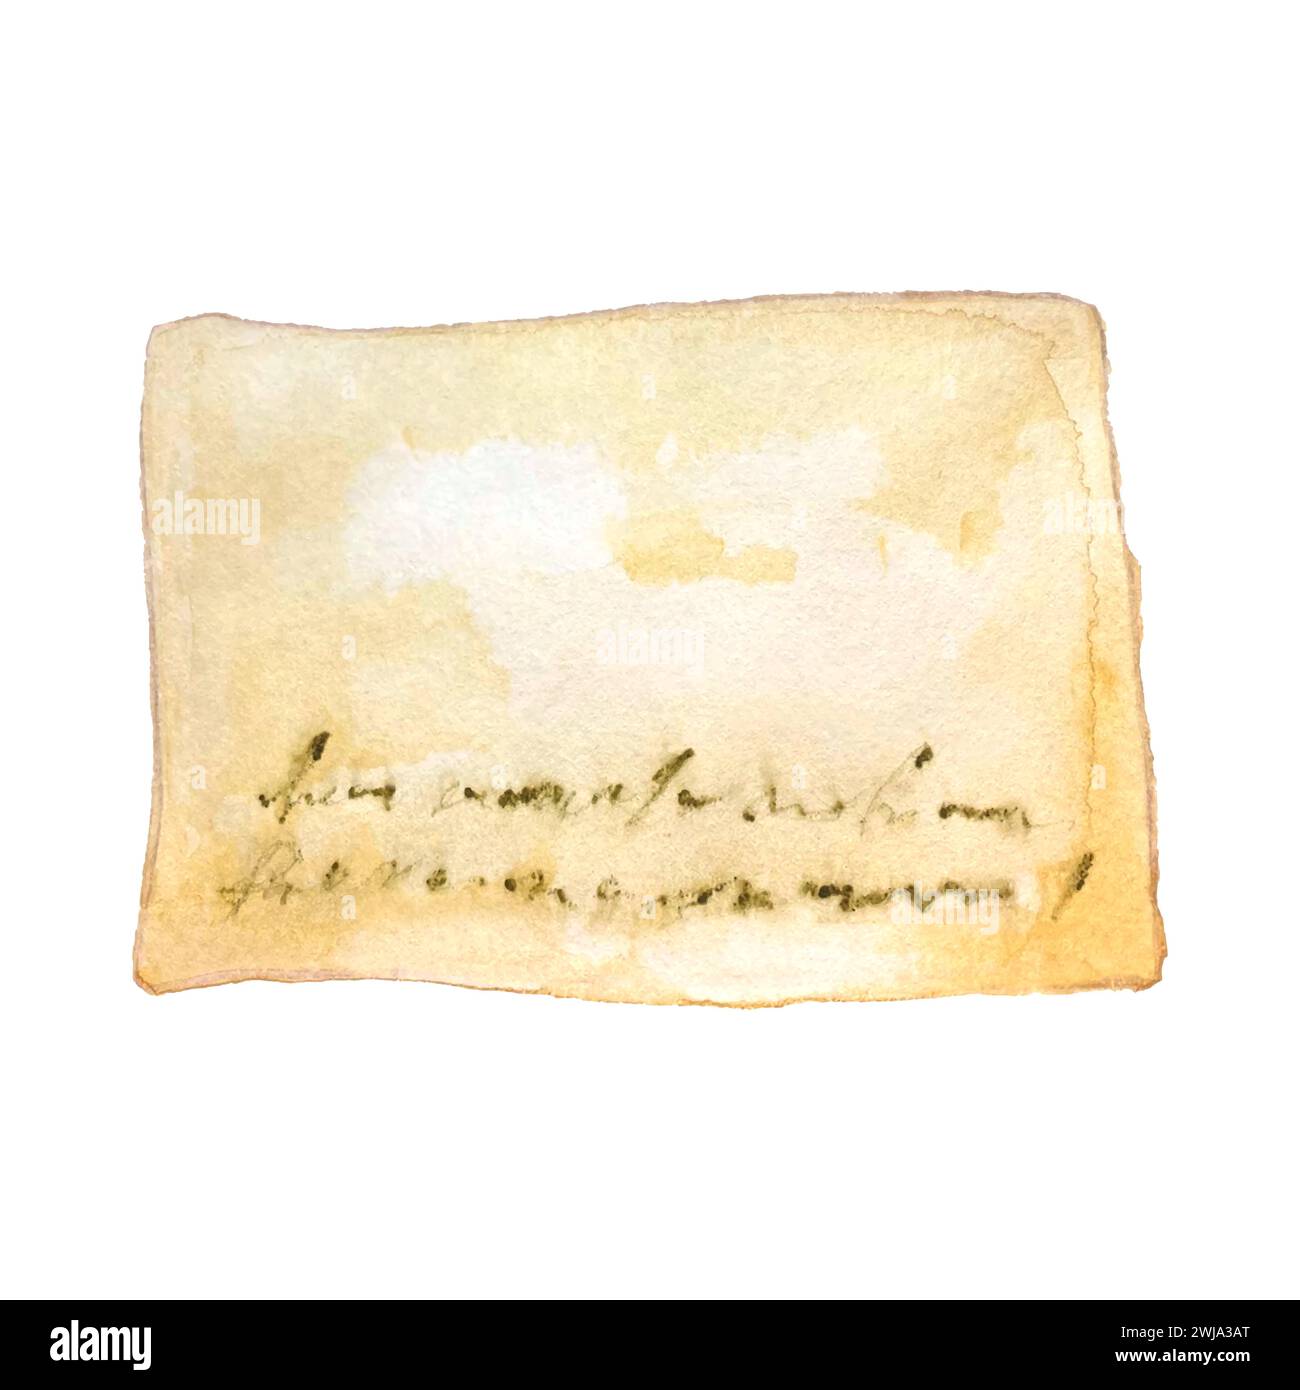 A close-up view of a time-worn, handwritten letter on yellowed paper, featuring faded ink script indicative of historical correspondence. Stock Vector